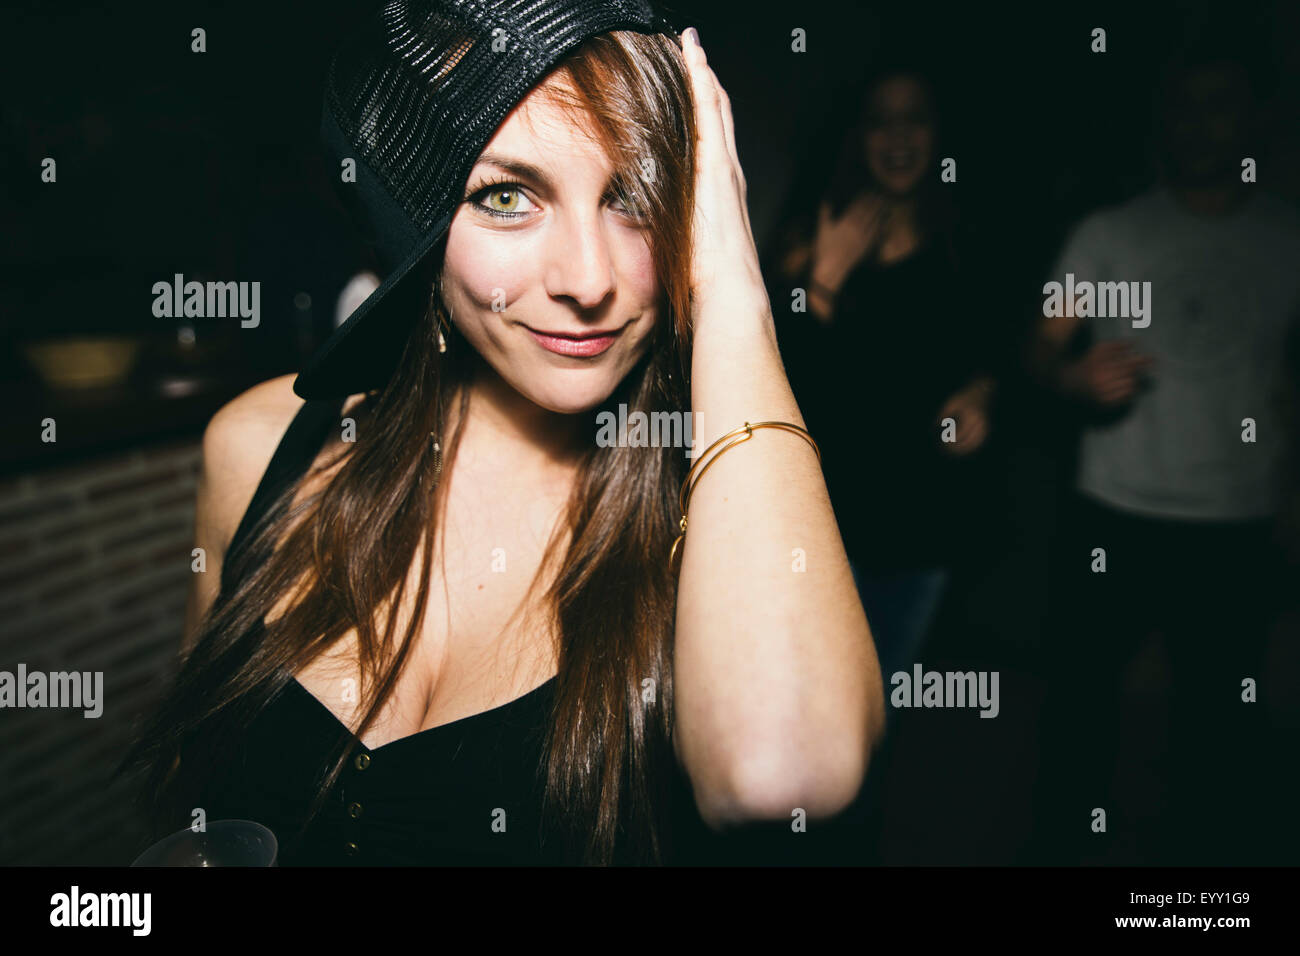 Smiling woman dancing in nightclub Banque D'Images